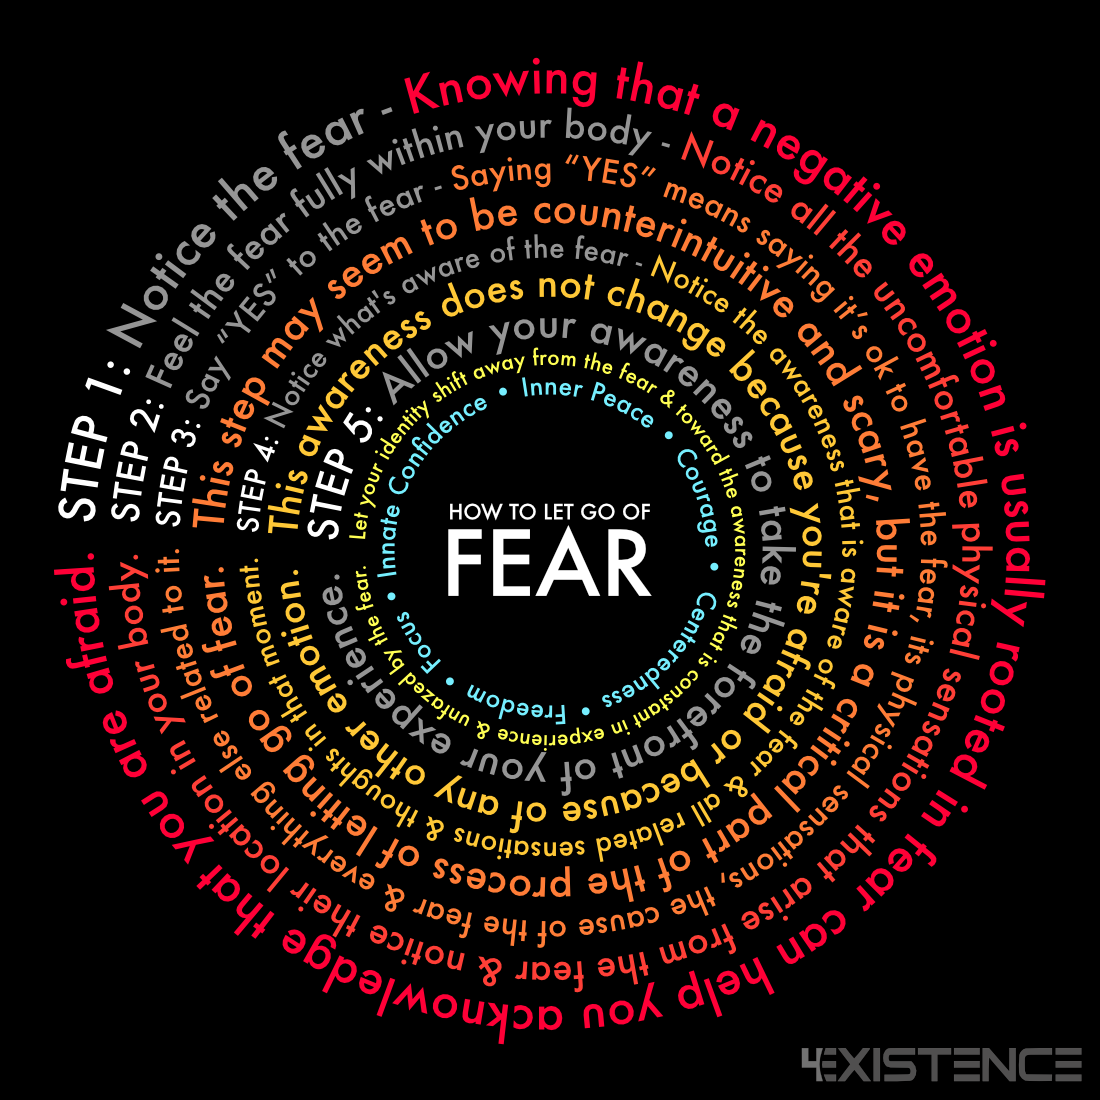 How To Let Go Of Fear Infographic